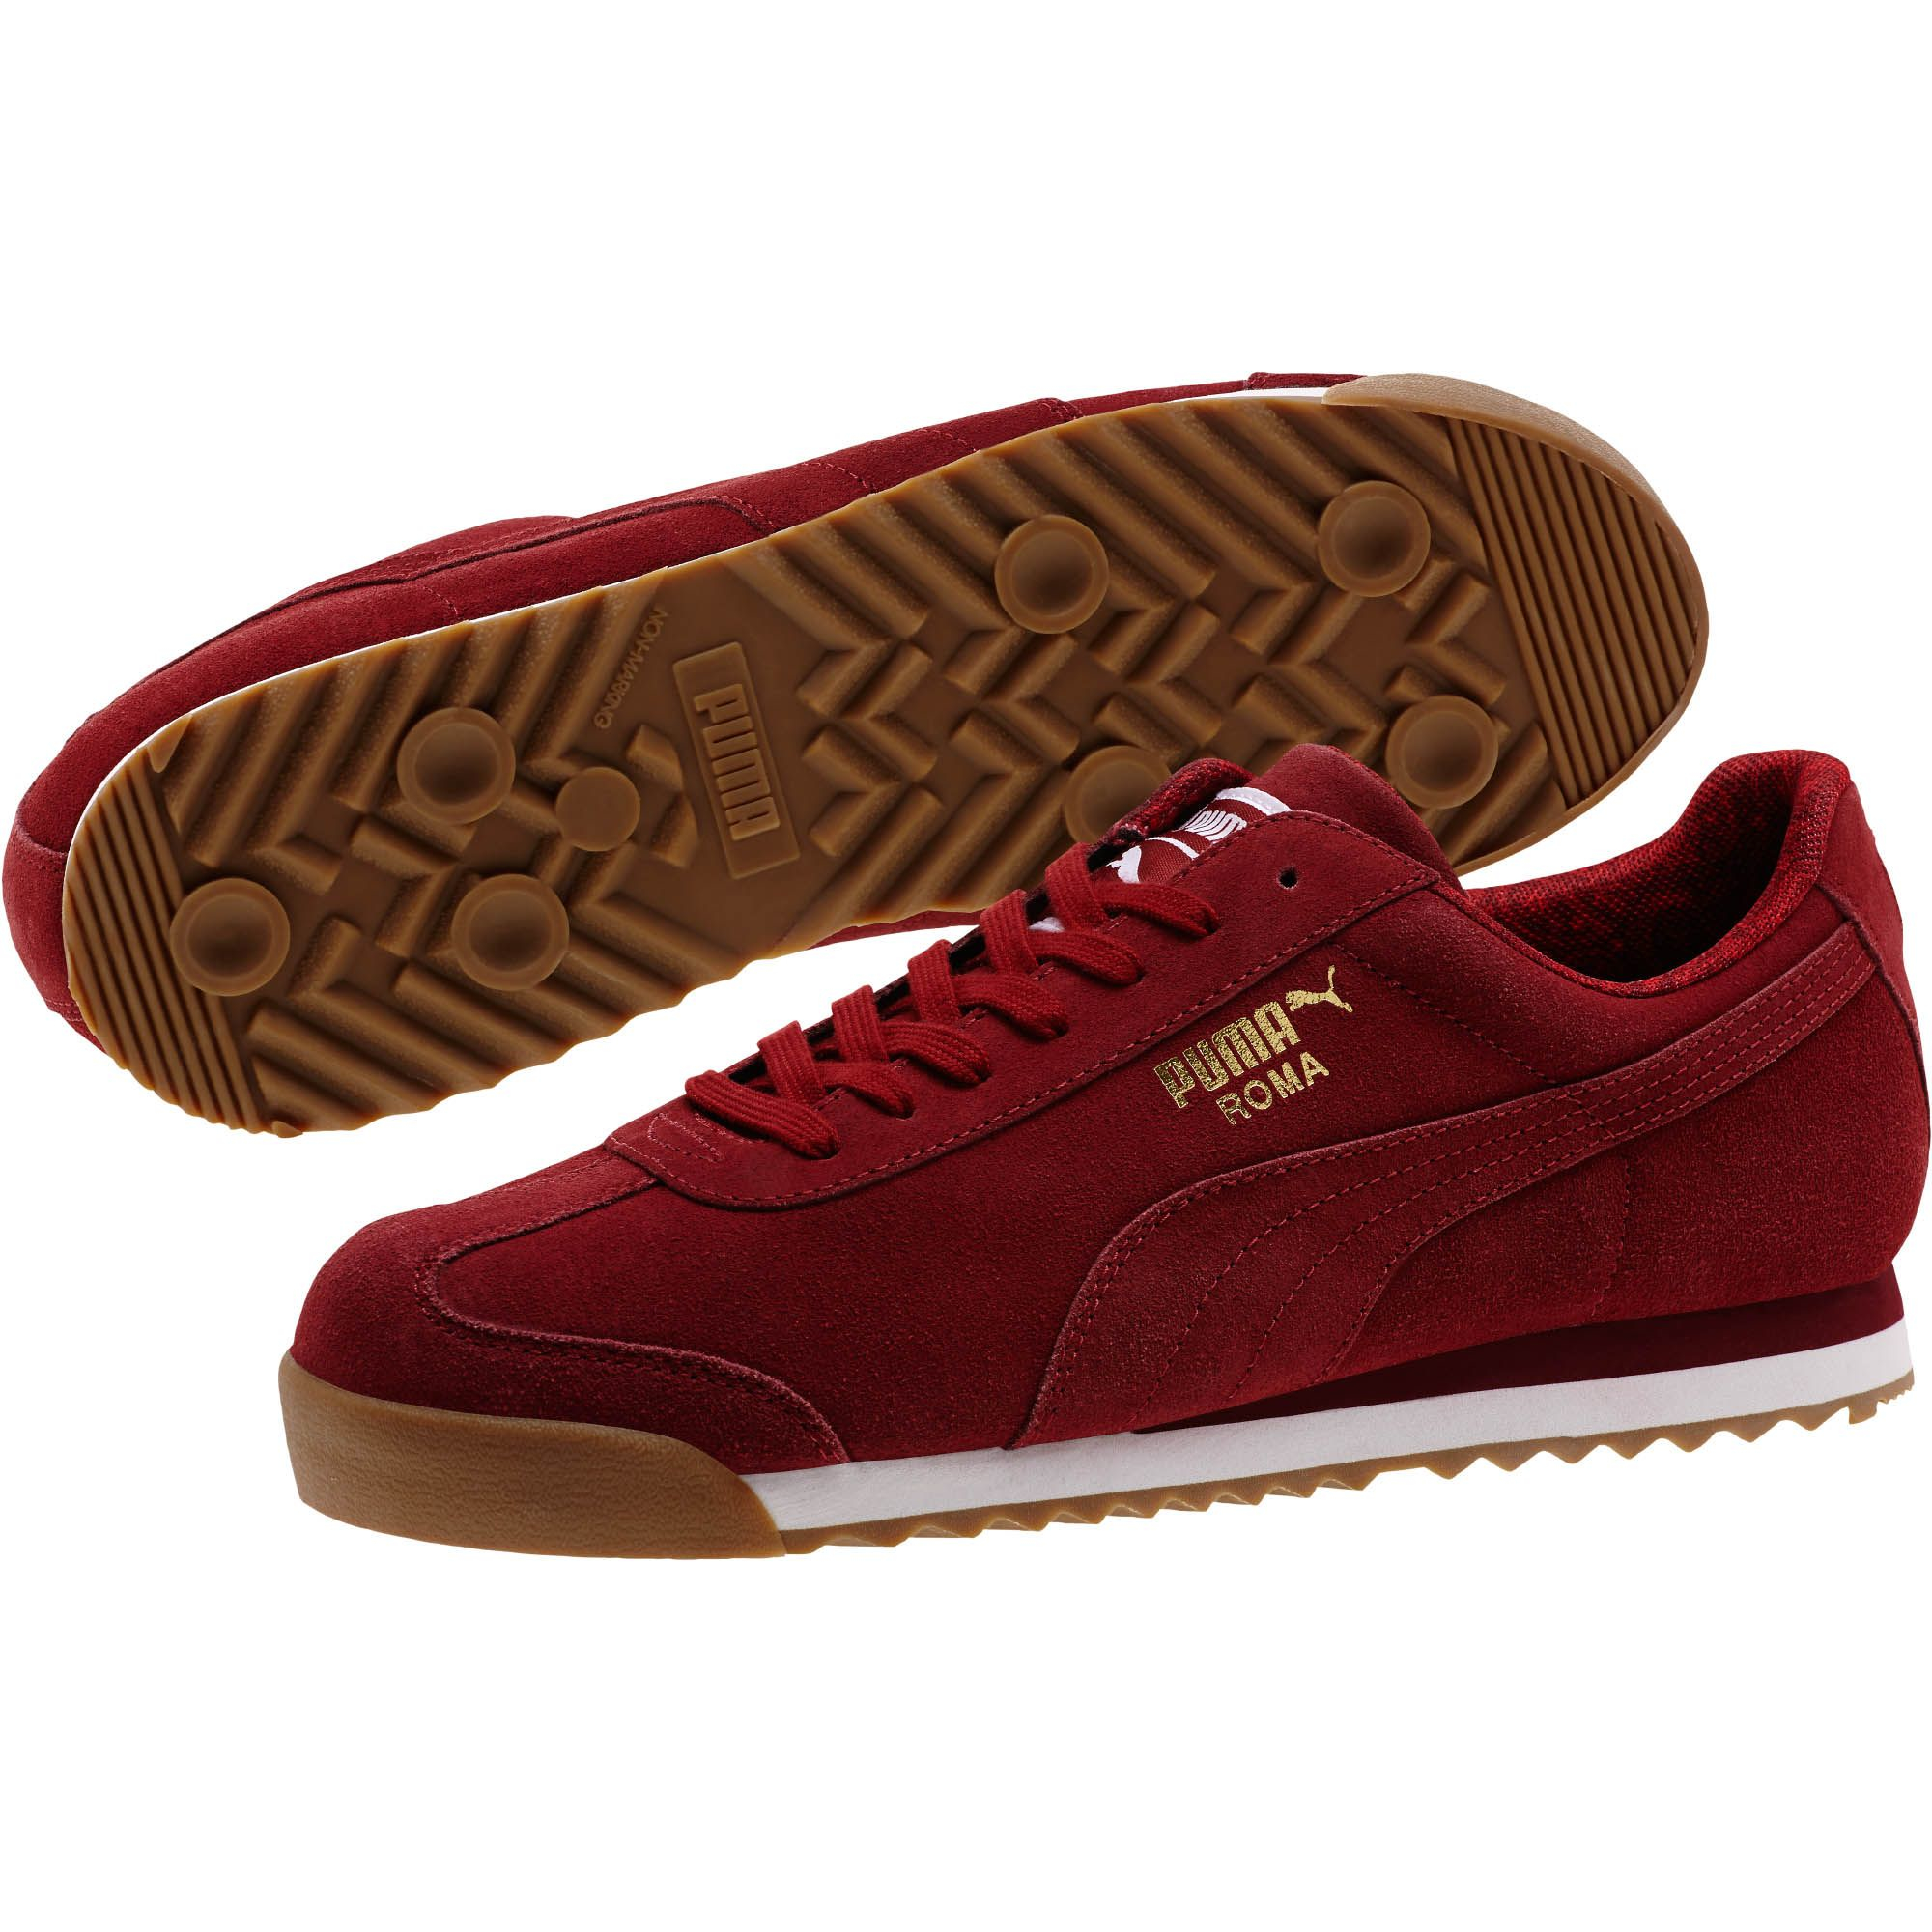 PUMA Roma Suede Paisley Men's Sneakers in Red for Men - Lyst